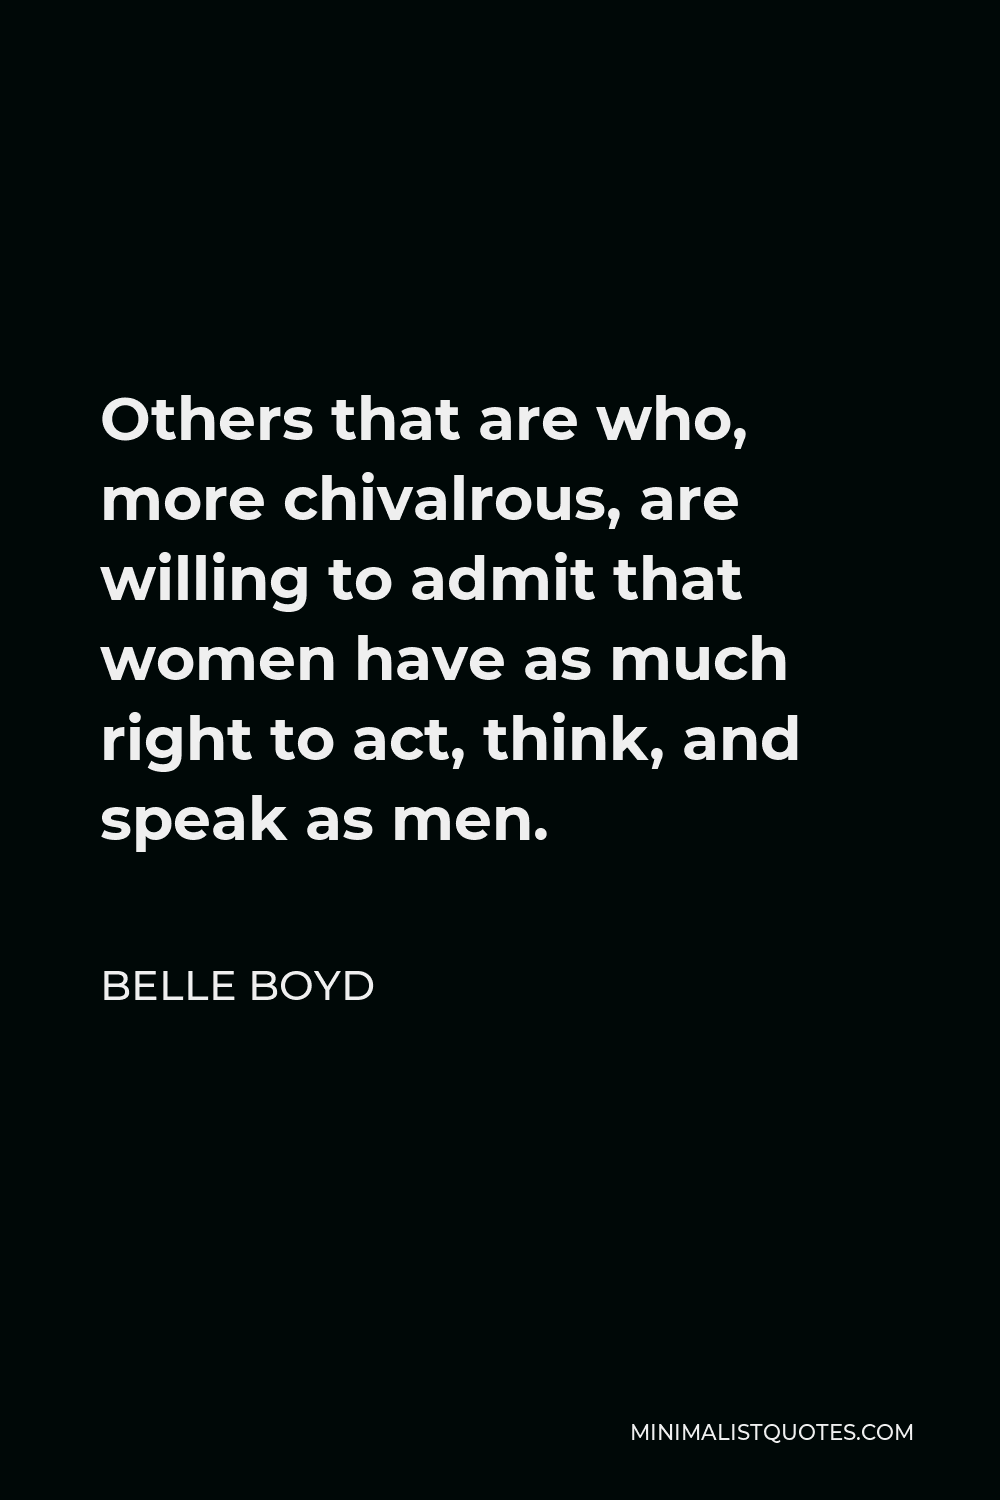 Belle Boyd Quote - Others that are who, more chivalrous, are willing to admit that women have as much right to act, think, and speak as men.